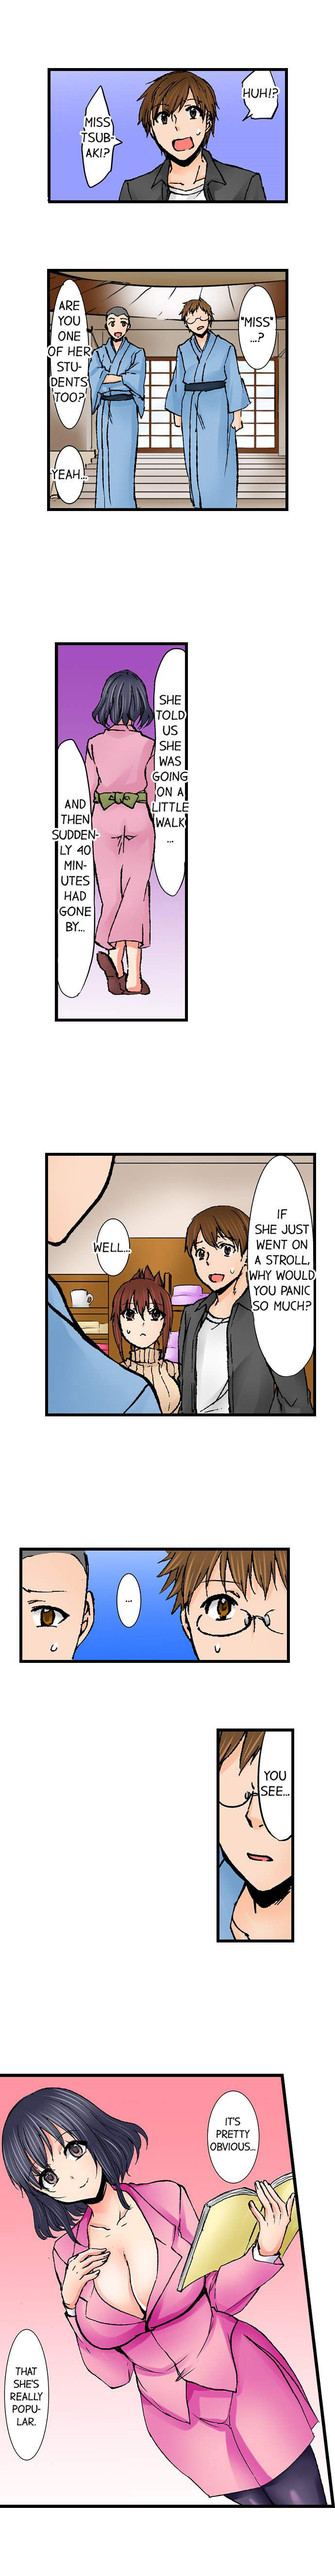 Touching My Older Sister Under the Table - Chapter 52 Page 2